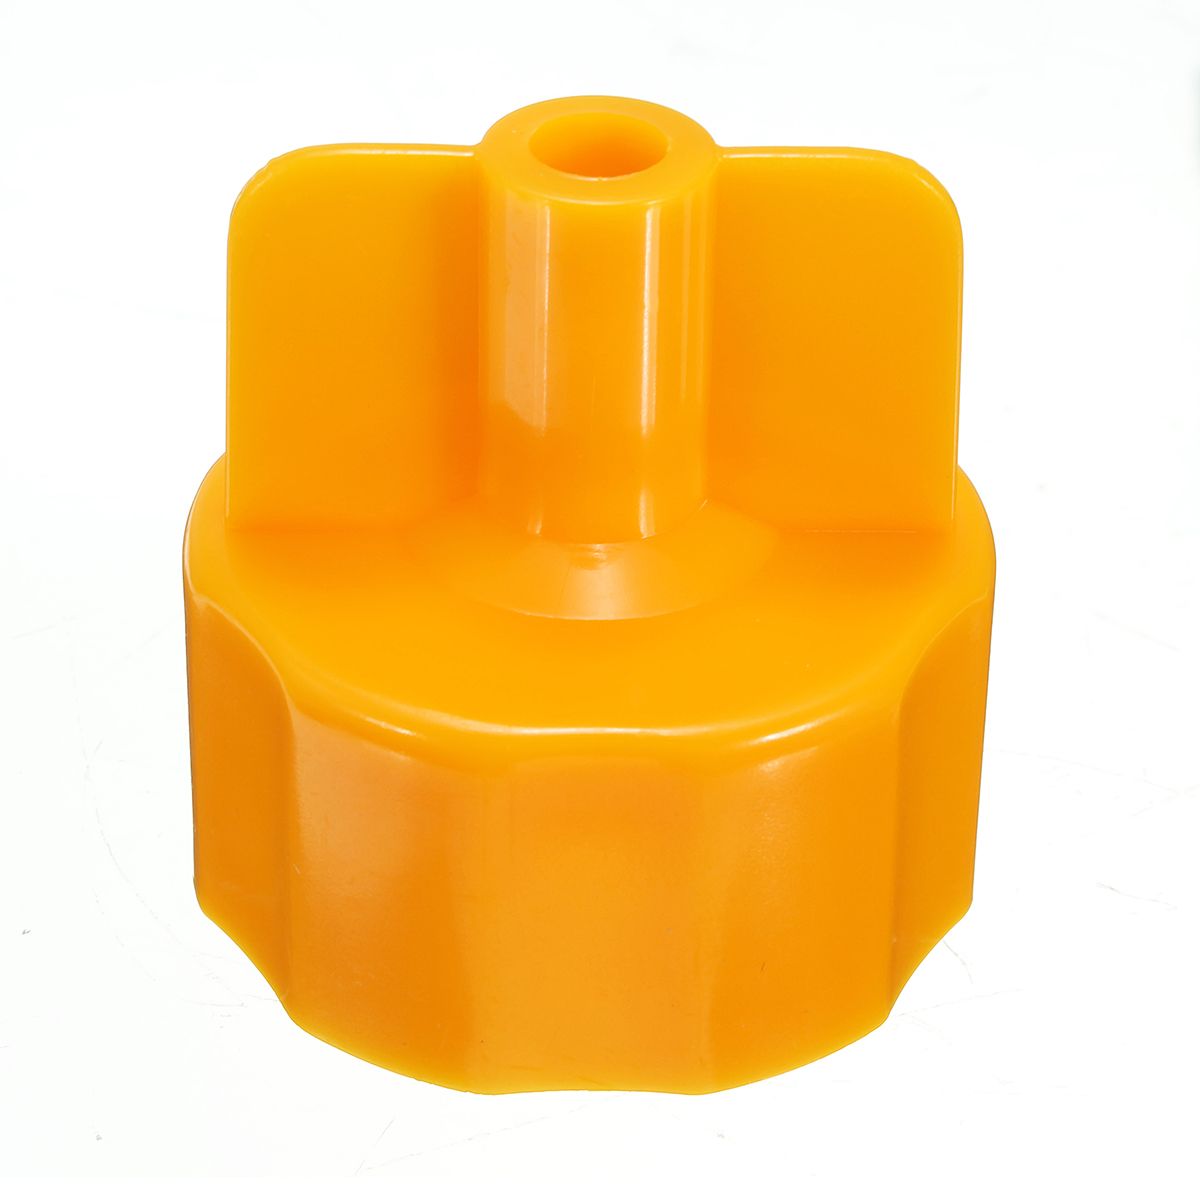 Tile-Leveling-System-Clips-Spacers-Tiling-Tools-Device-Free-Flooring-200Pcs-Clips--100Pcs-Covers-1202315